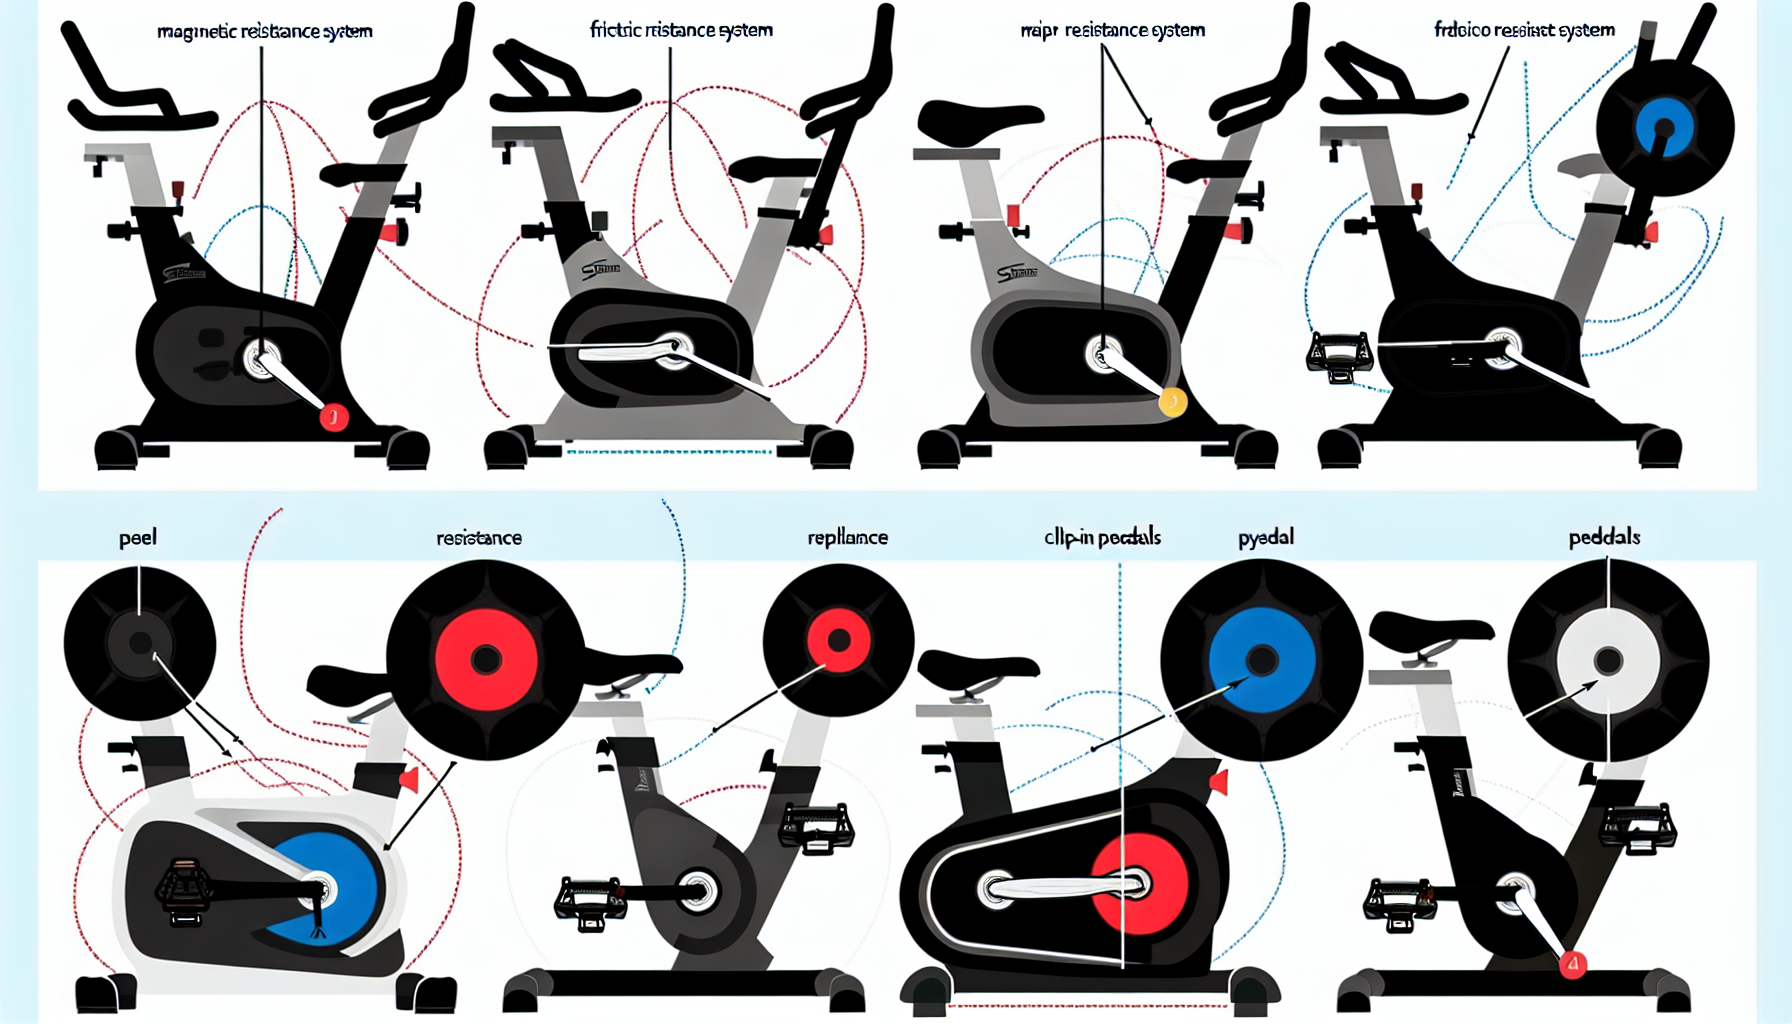 Comparison of resistance types and pedal options on different exercise bikes